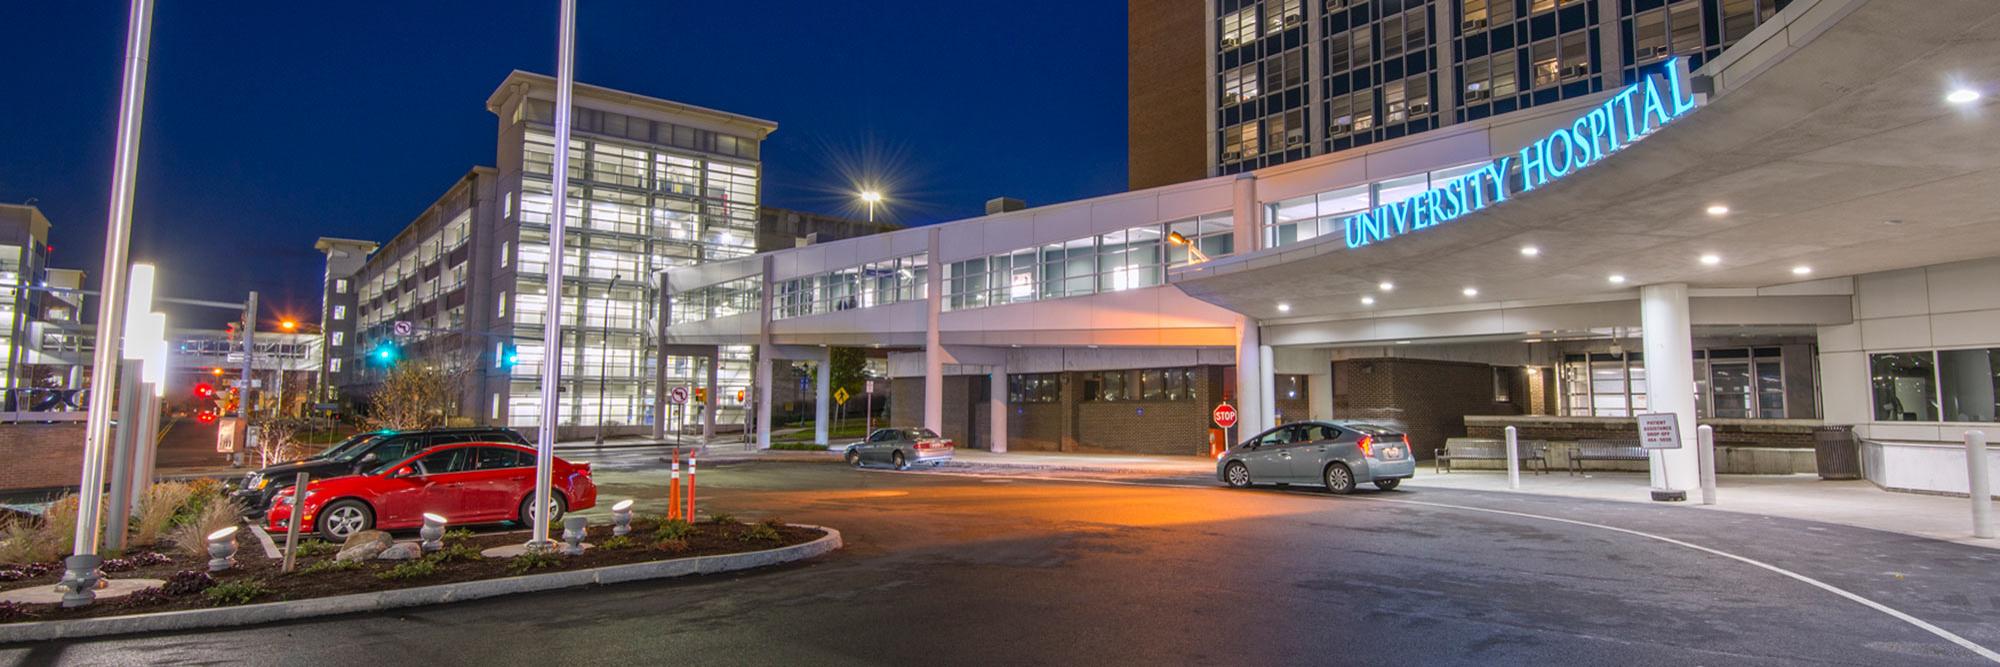 Upstate Patient Care | SUNY Upstate Medical University